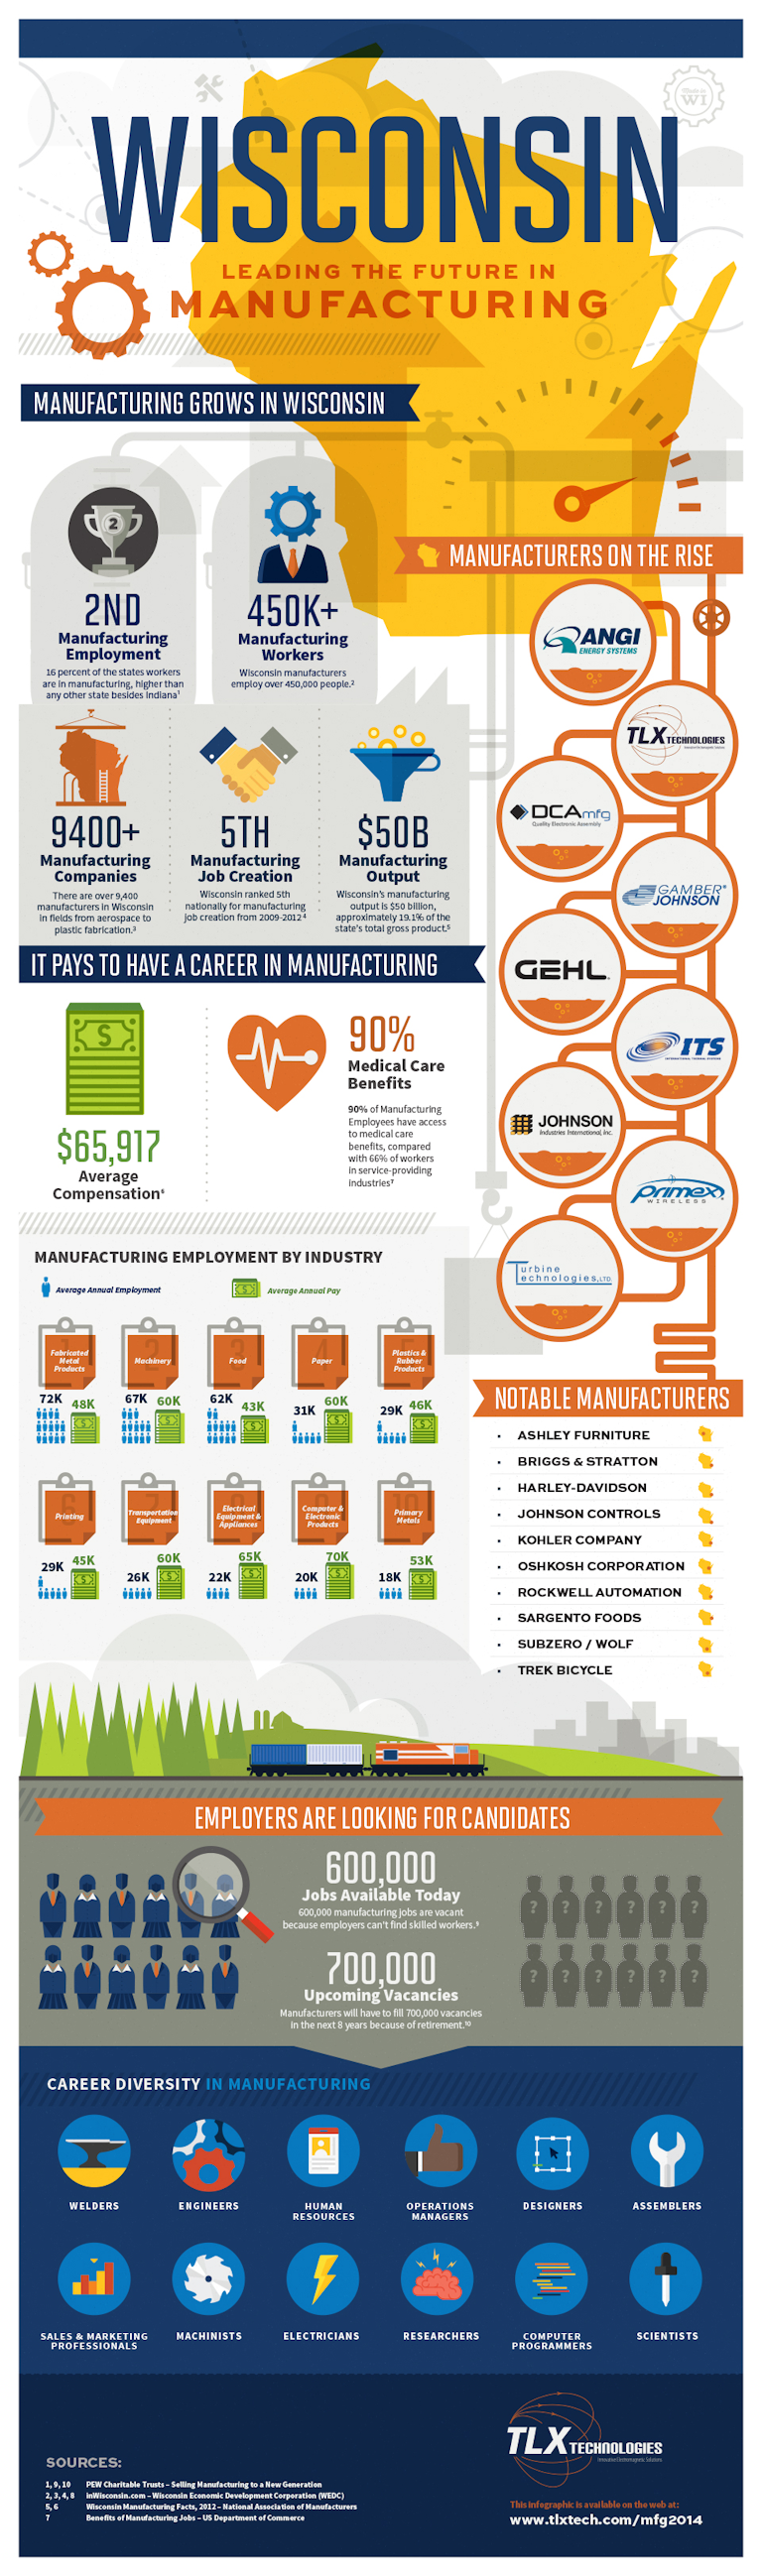 Wisconsin Manufacturing Infographic